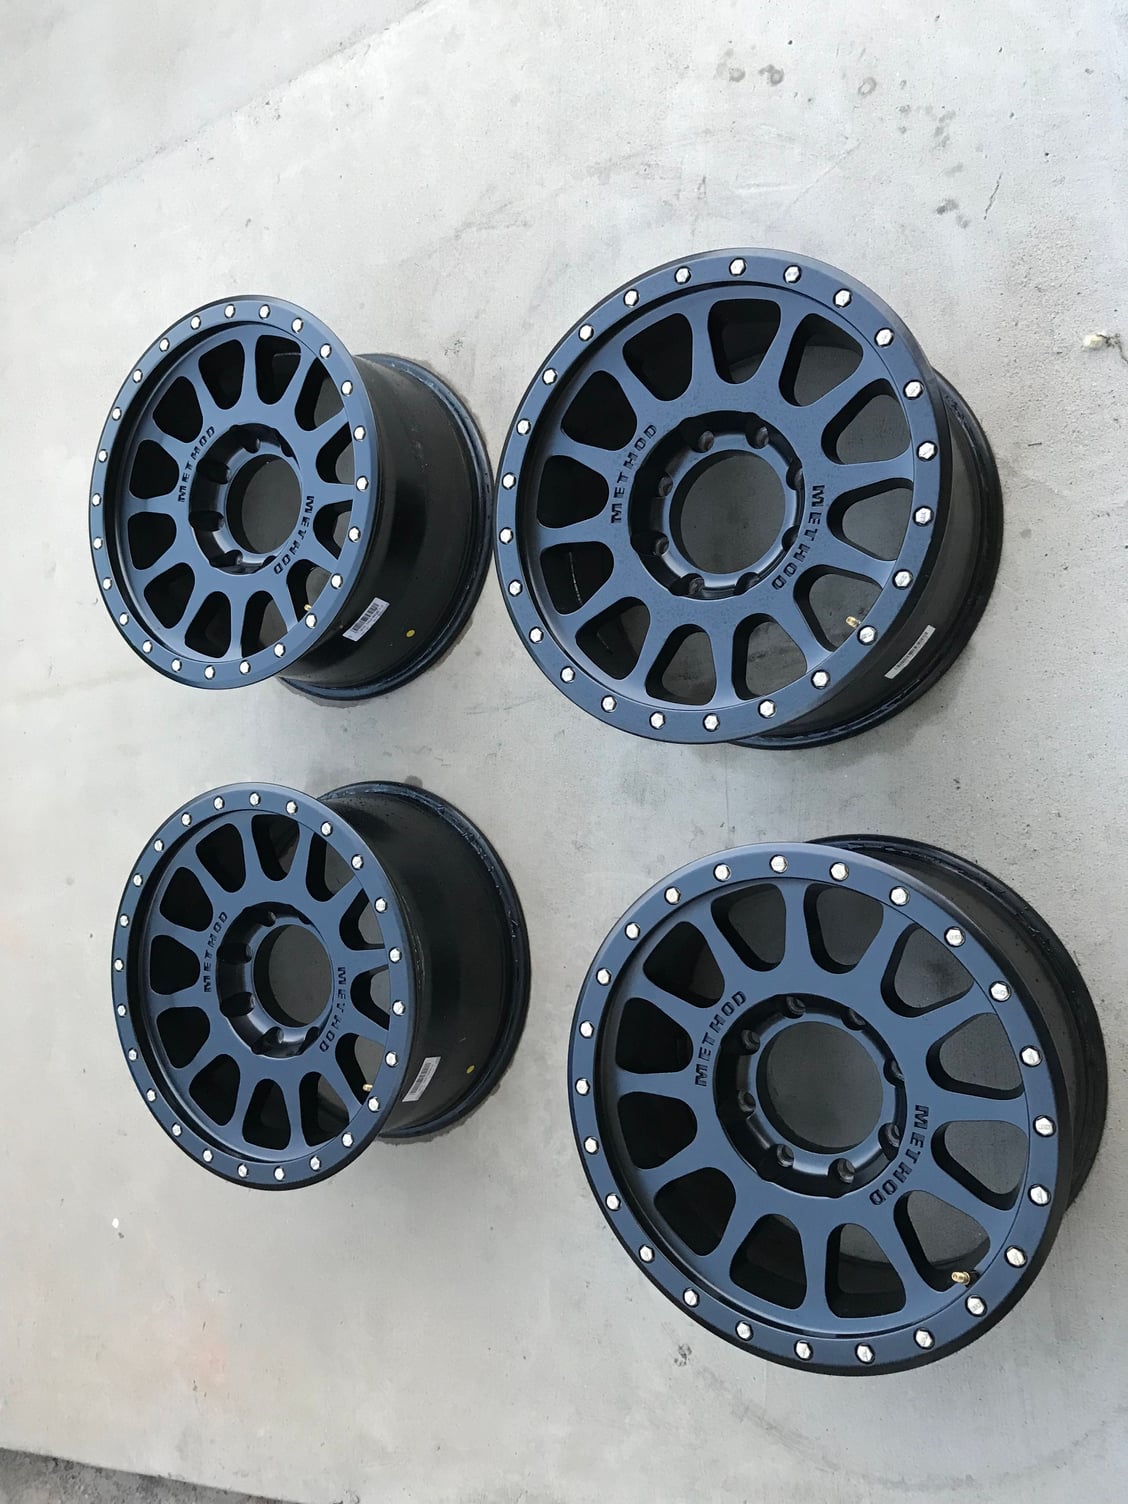 Wheels and Tires/Axles - Method Race Wheels - NV - 18x9 - Used - 2004 to 2018 Ford E-250 - Austin, TX 78724, United States